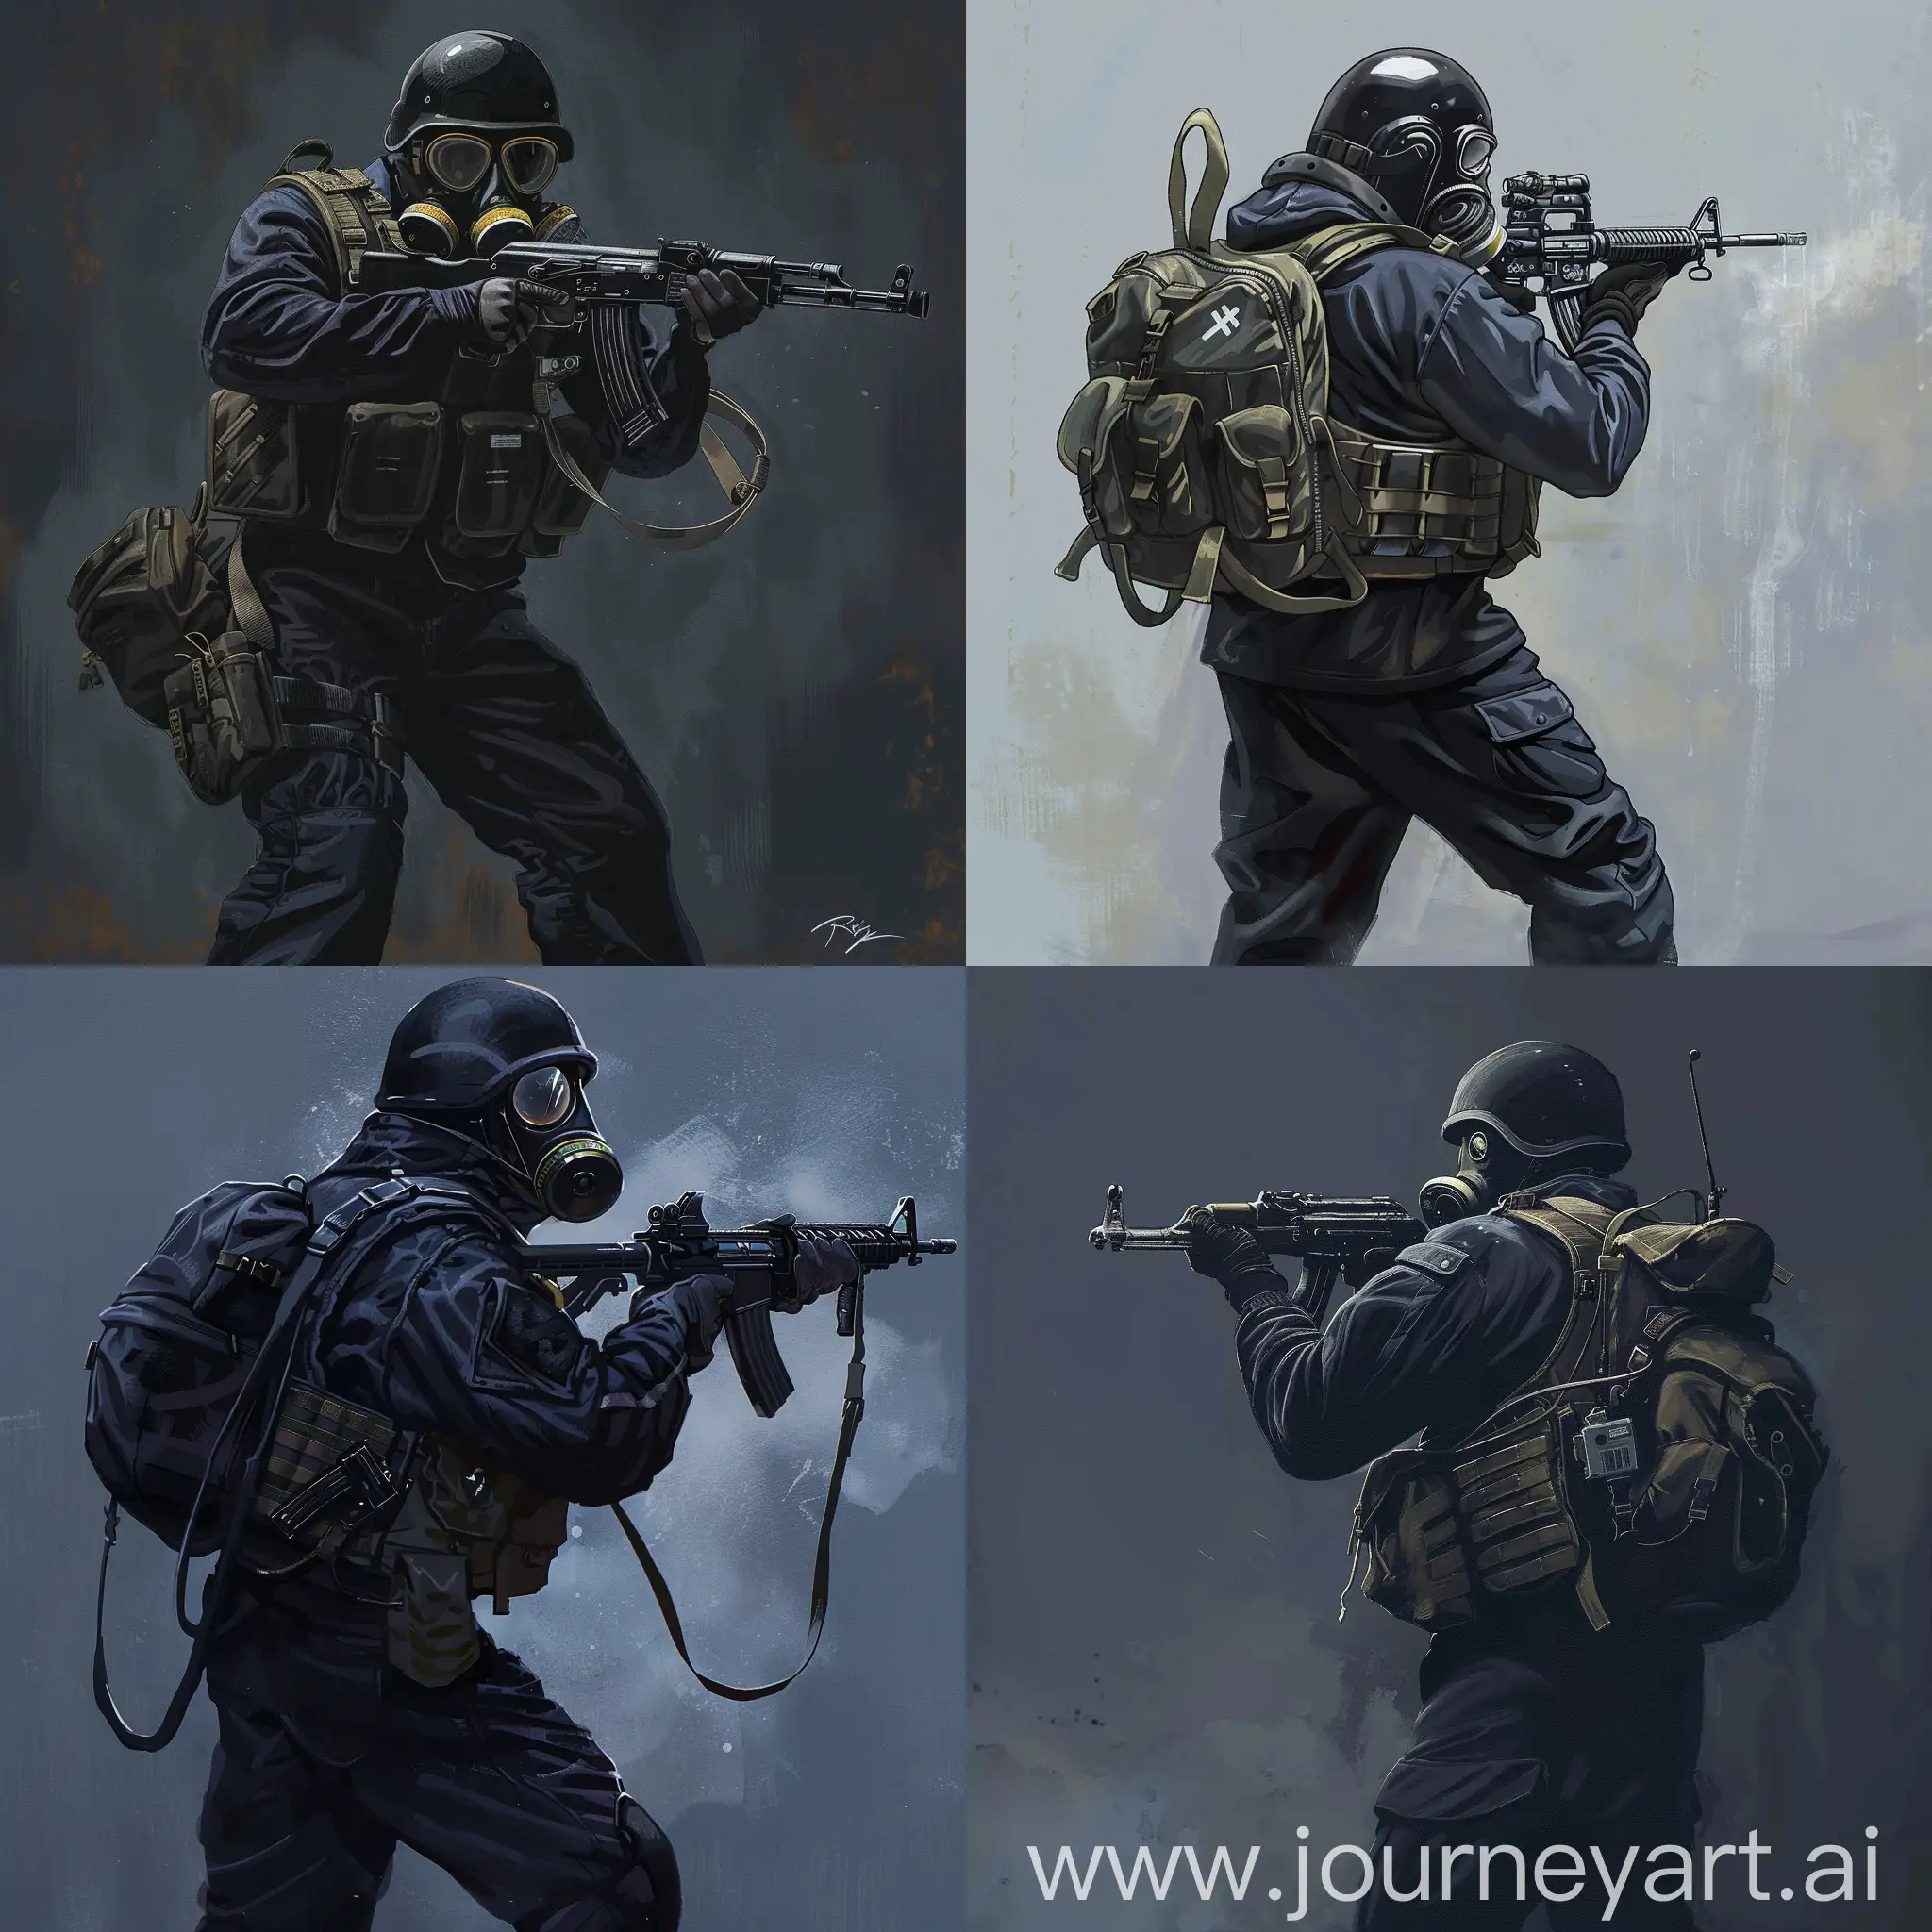 Concept art of a soldier, Dark blue uniform, military bulletproof vest, military unloading, a gas mask on his face, a small military backpack on his back, and an MP-5 weapon in his hands.